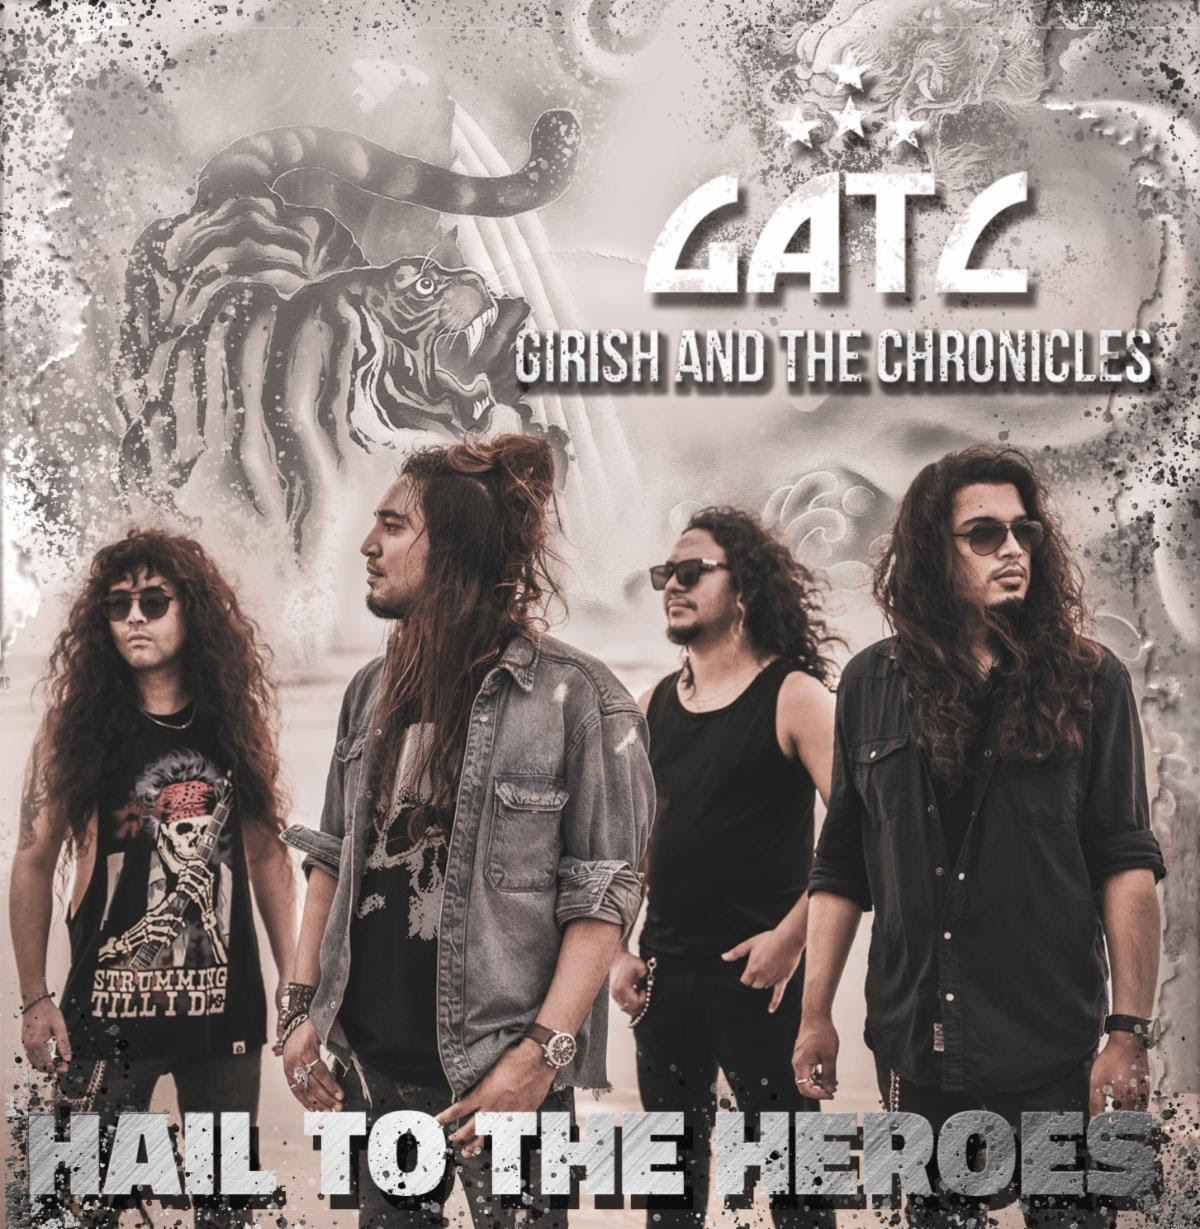 India Has One Of The Best Current Hair Metal Bands With Girish And The Chronicles: Listen Here!